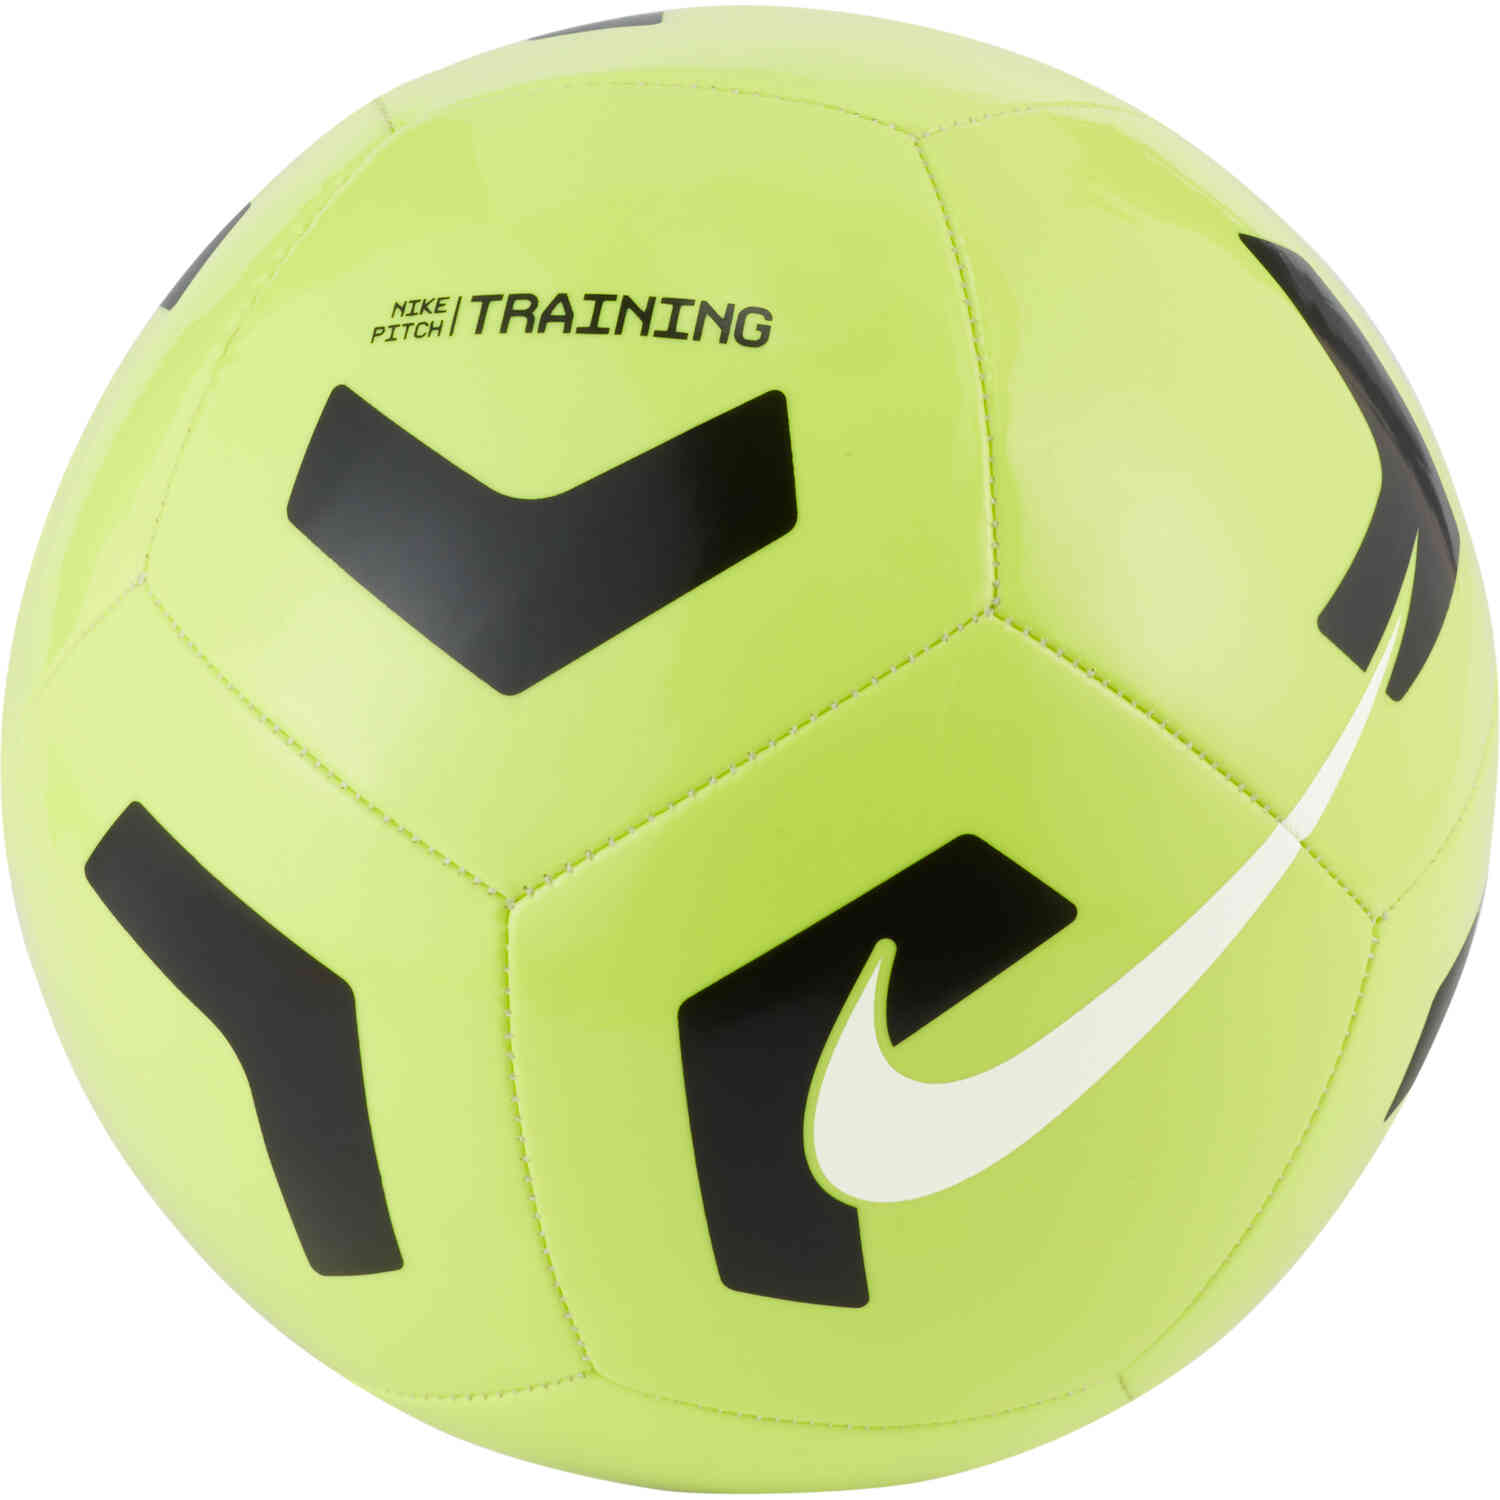 Nike Pitch Training Soccer Ball - Volt & Black with White